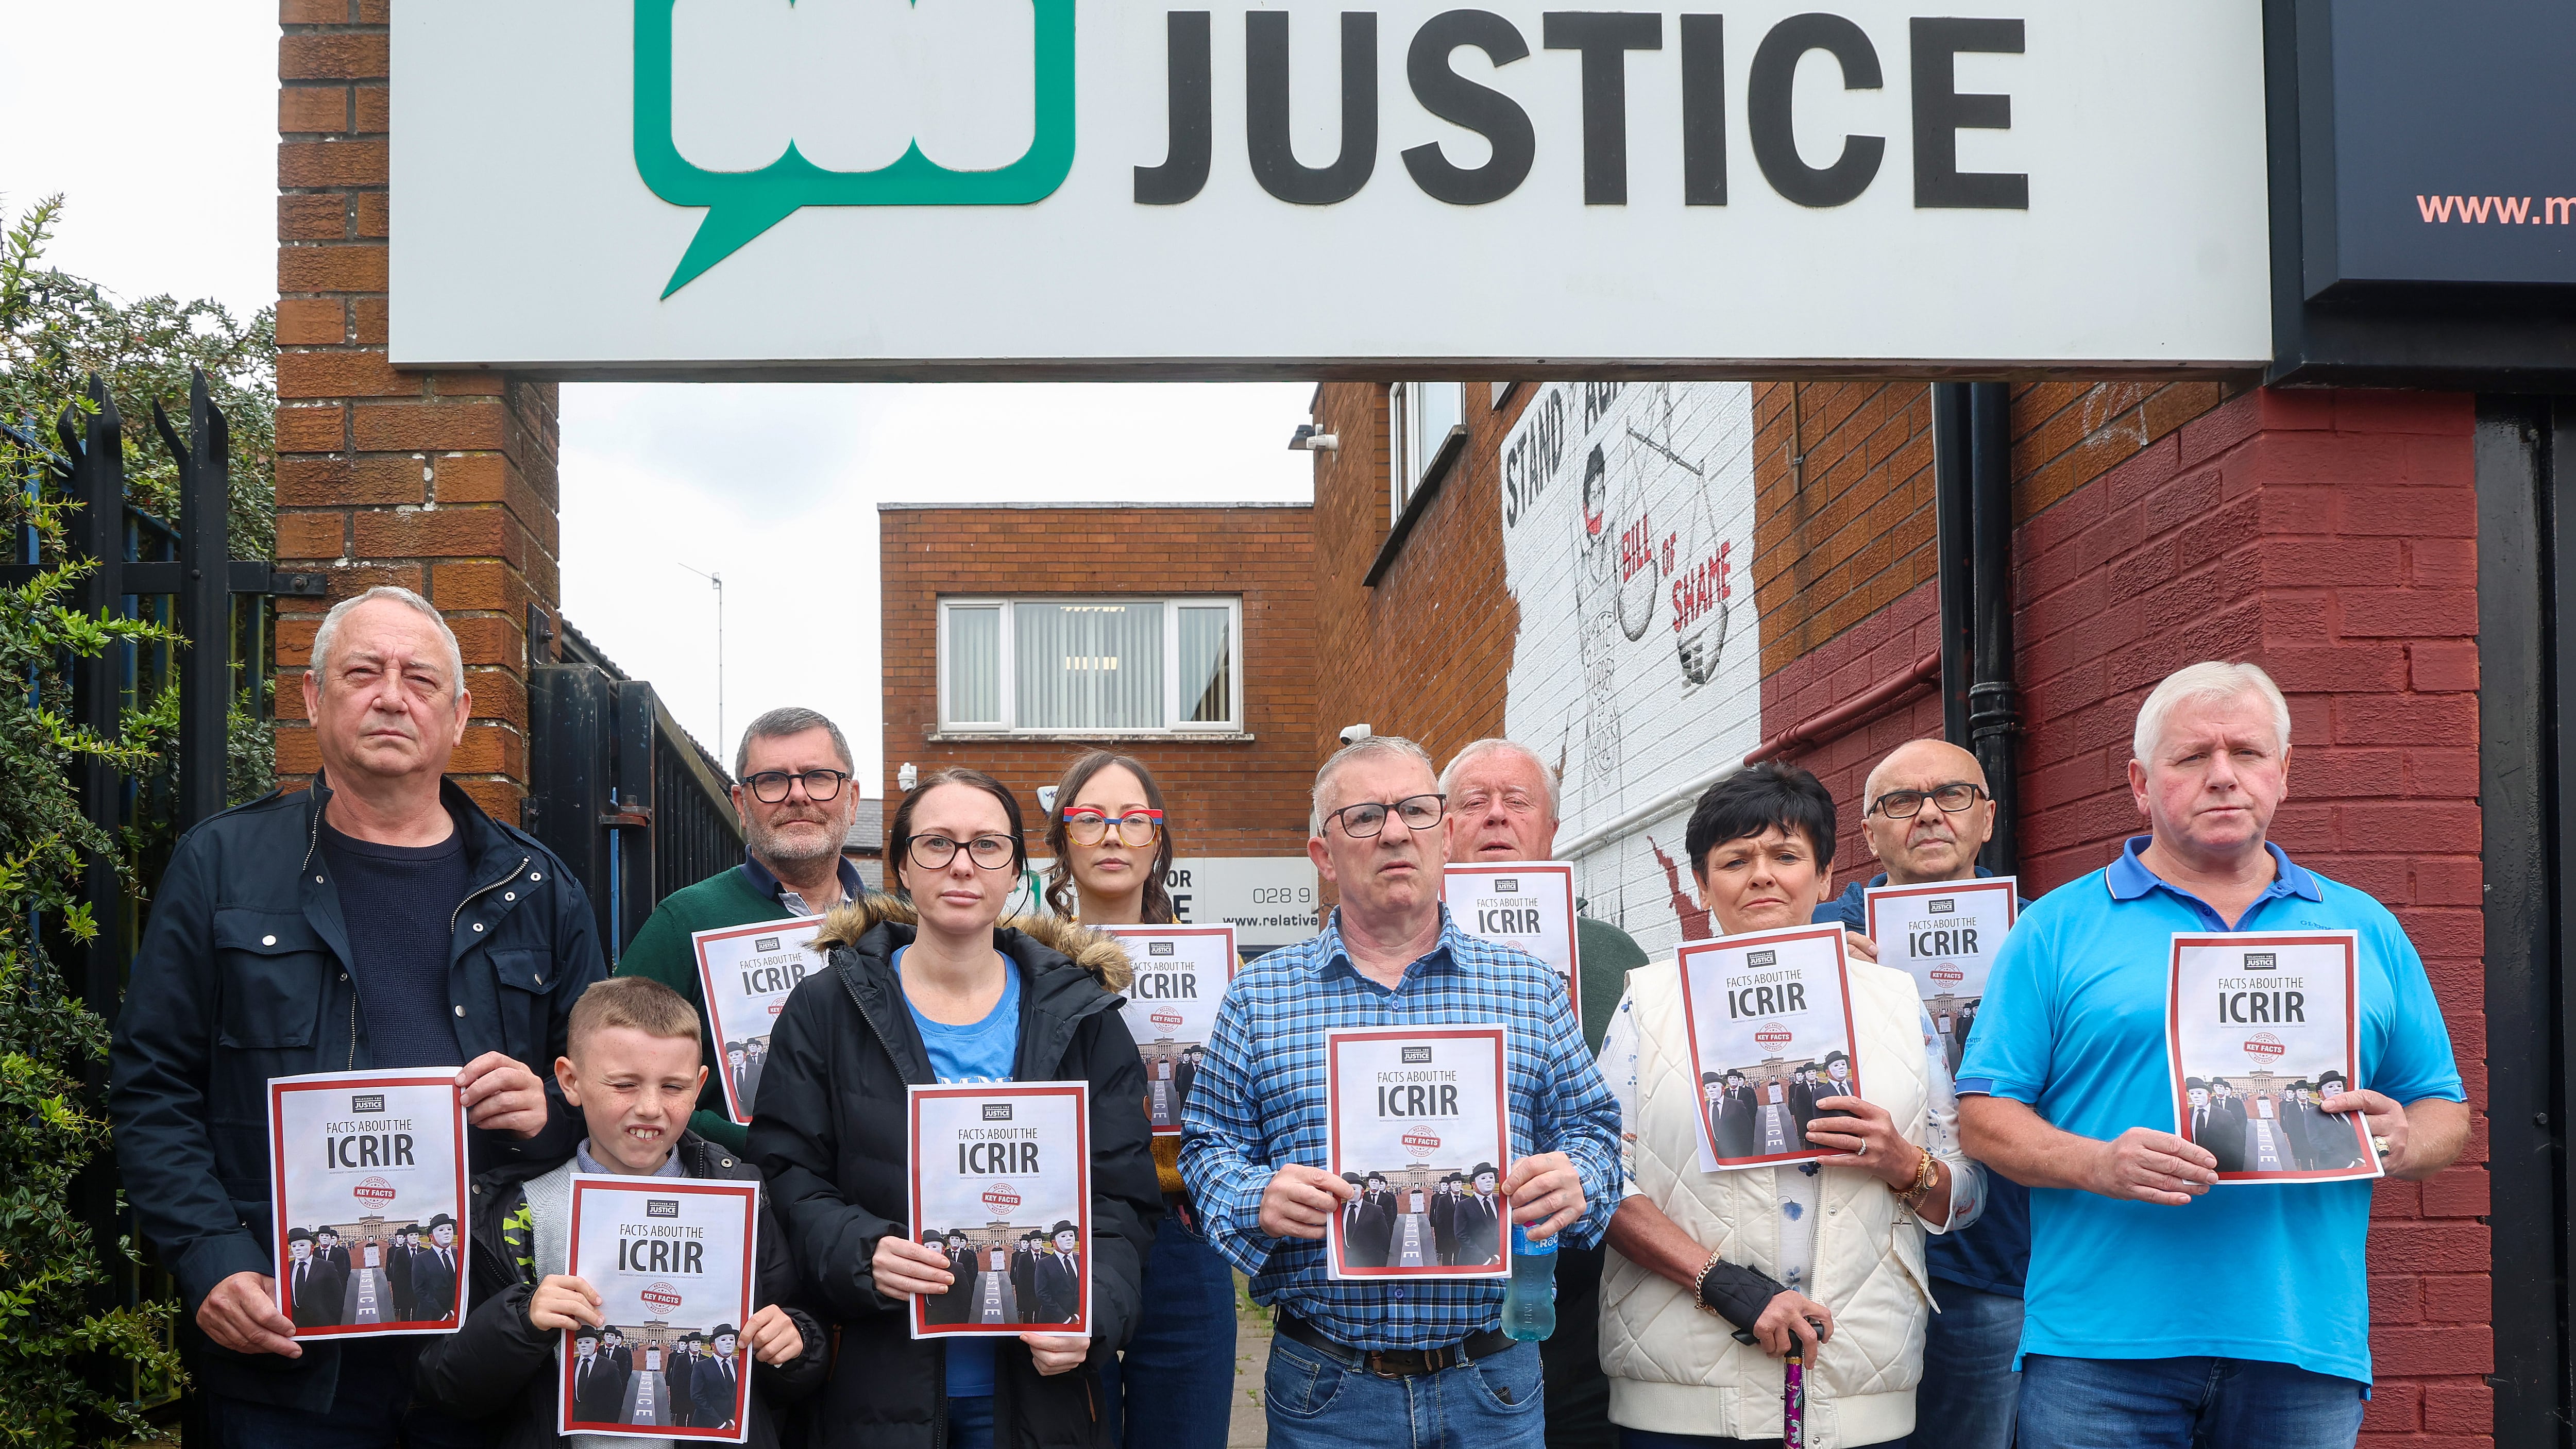 Families gather at the office of Relatives for Justice for the launch of a booklet about the ICRIR (Independent Commission for Reconciliation and Information Recovery). PICTURE: MAL MCCANN